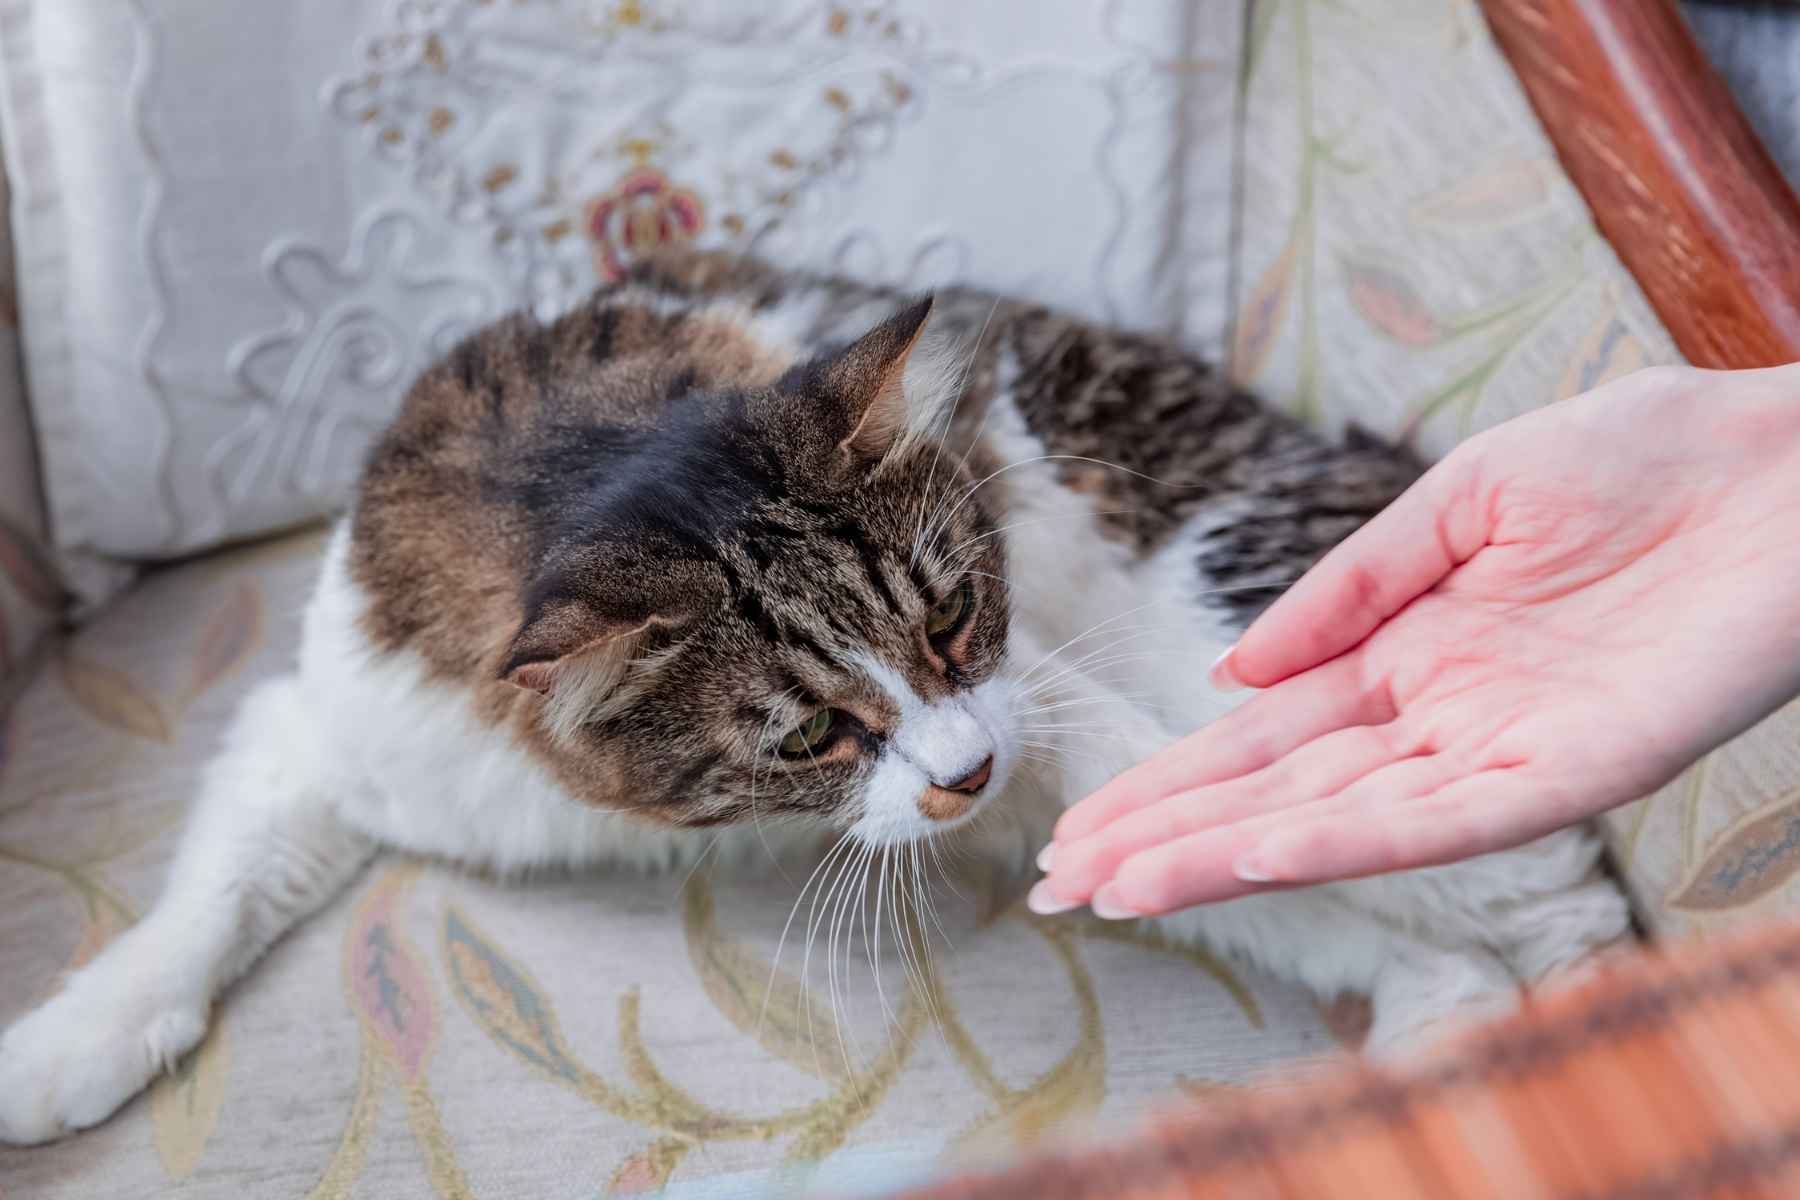 Cat sniffing its owner's hand